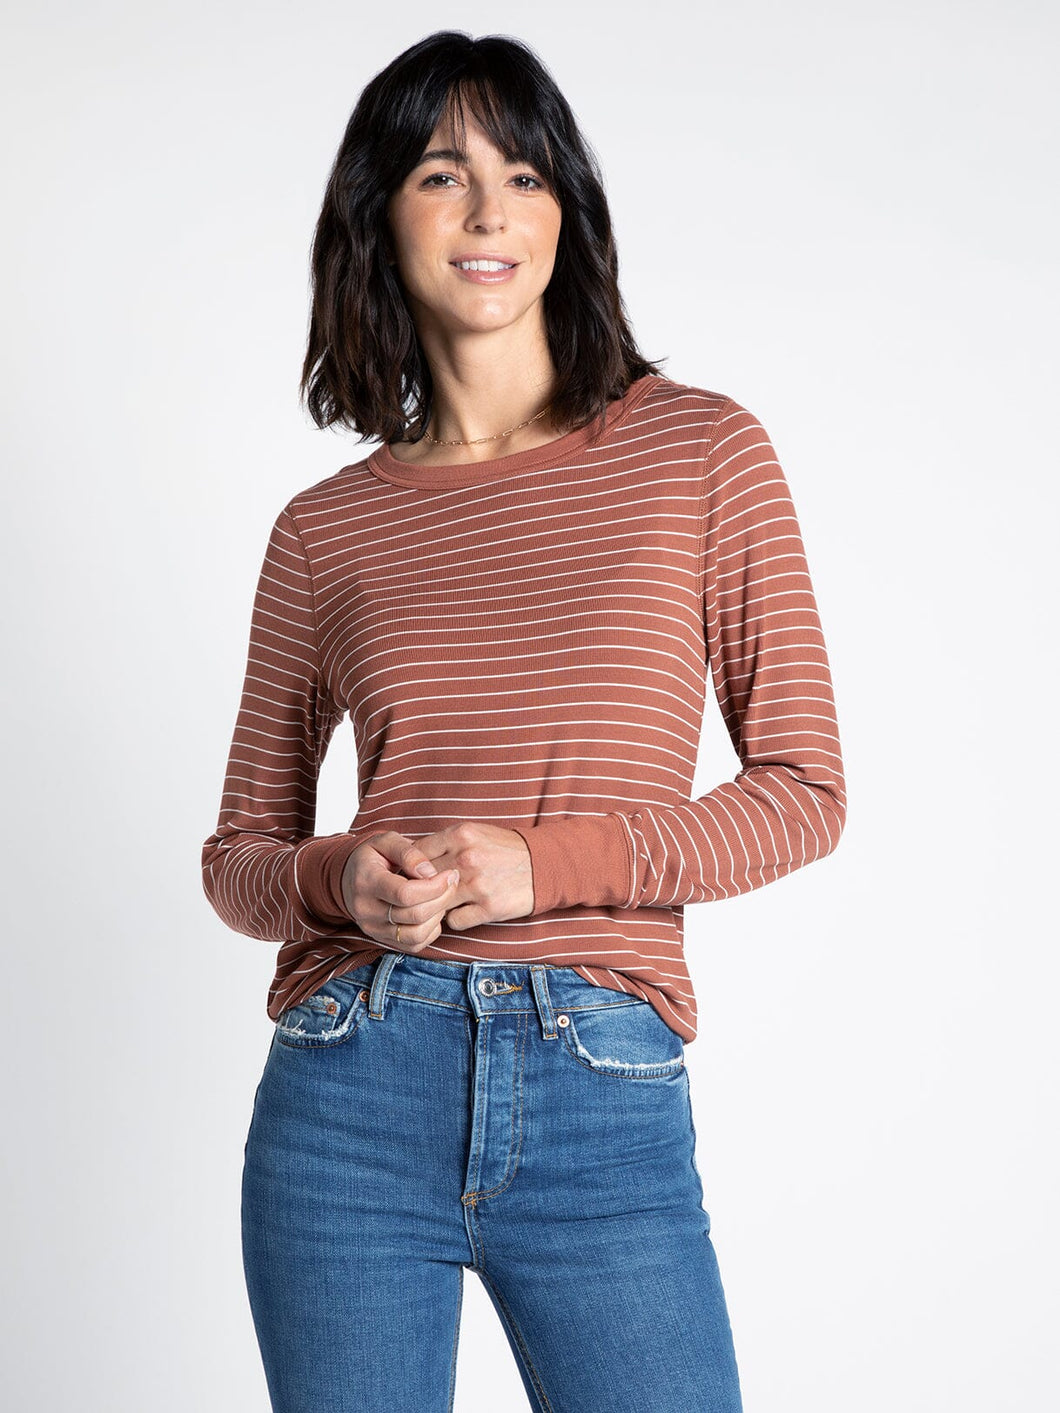 THE STACY PERFECT L/S TOP - rustic brown striped